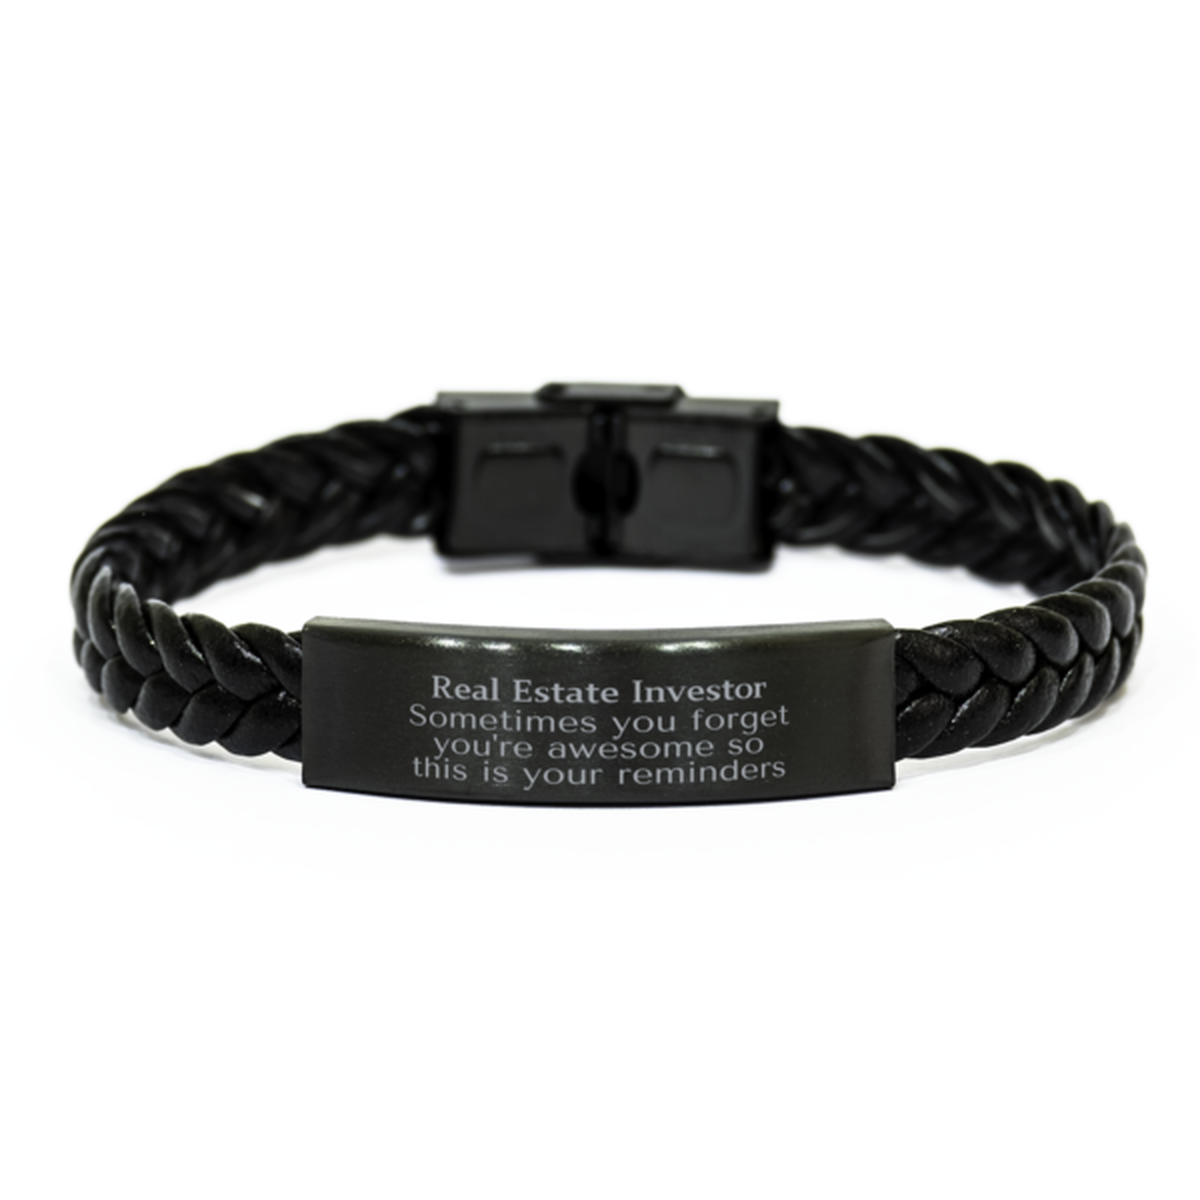 Sentimental Real Estate Investor Braided Leather Bracelet, Real Estate Investor Sometimes you forget you're awesome so this is your reminders, Graduation Christmas Birthday Gifts for Real Estate Investor, Men, Women, Coworkers